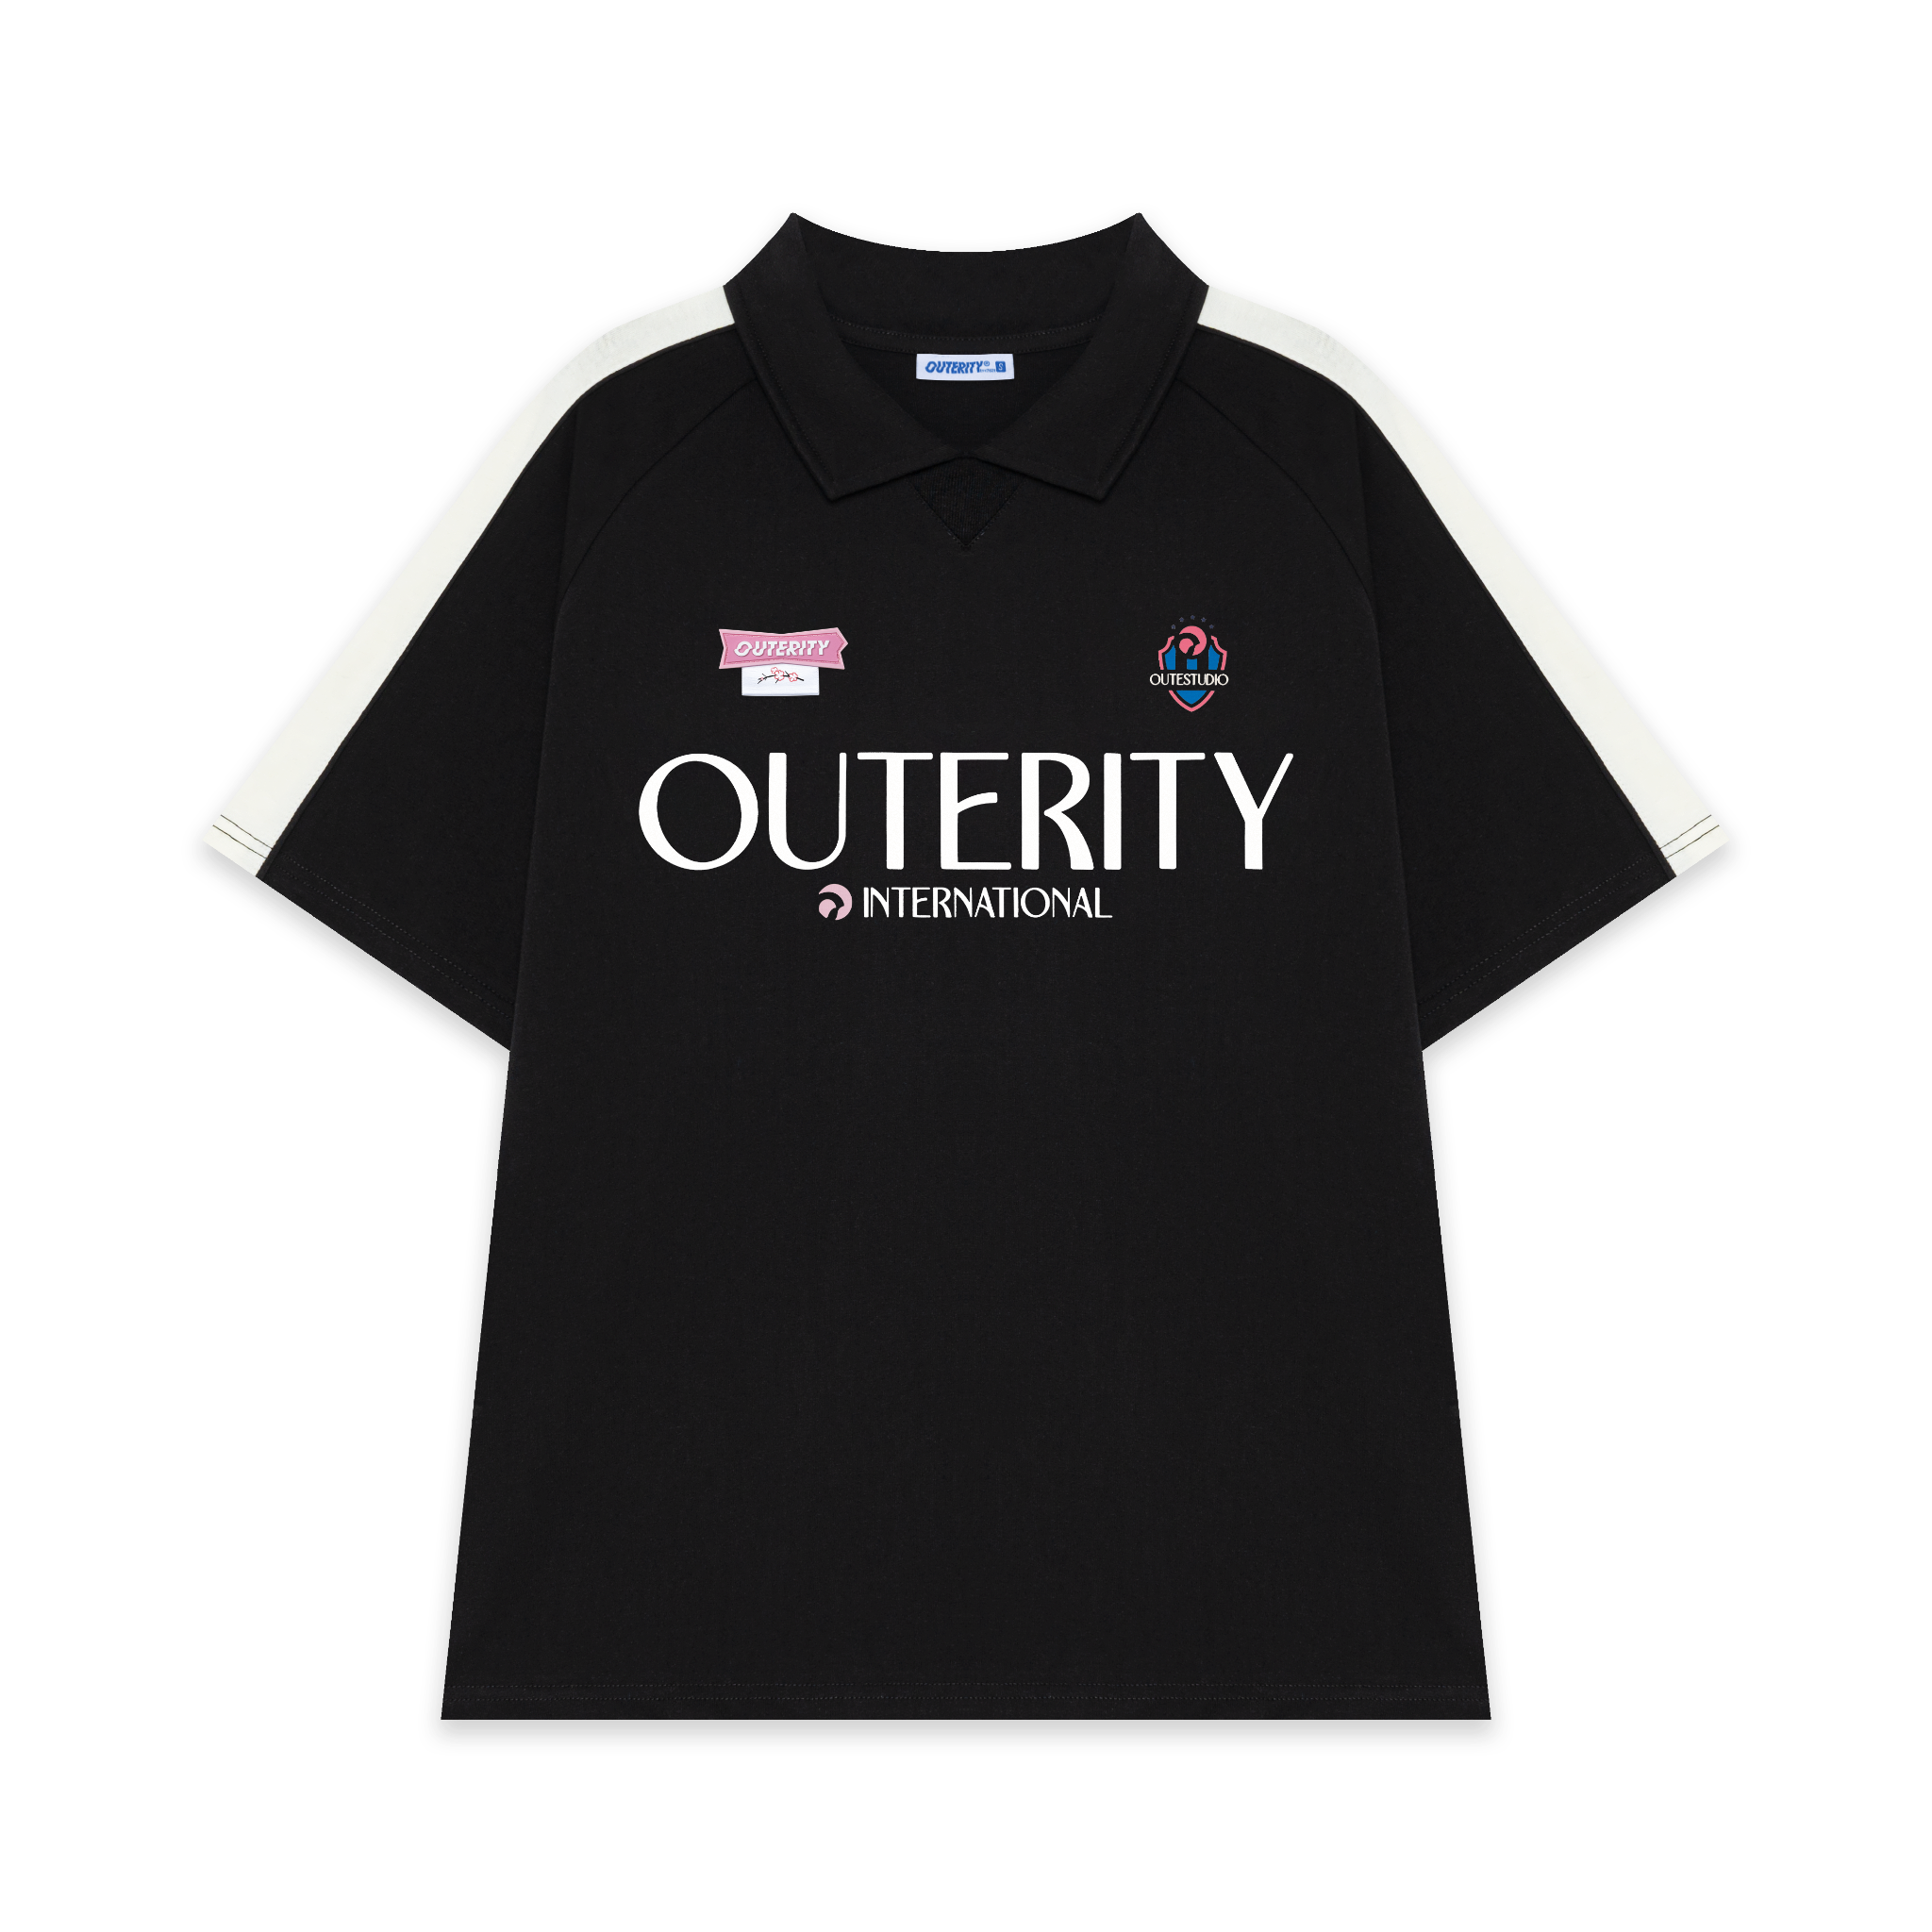  Polo Outerity Five Star / Black 